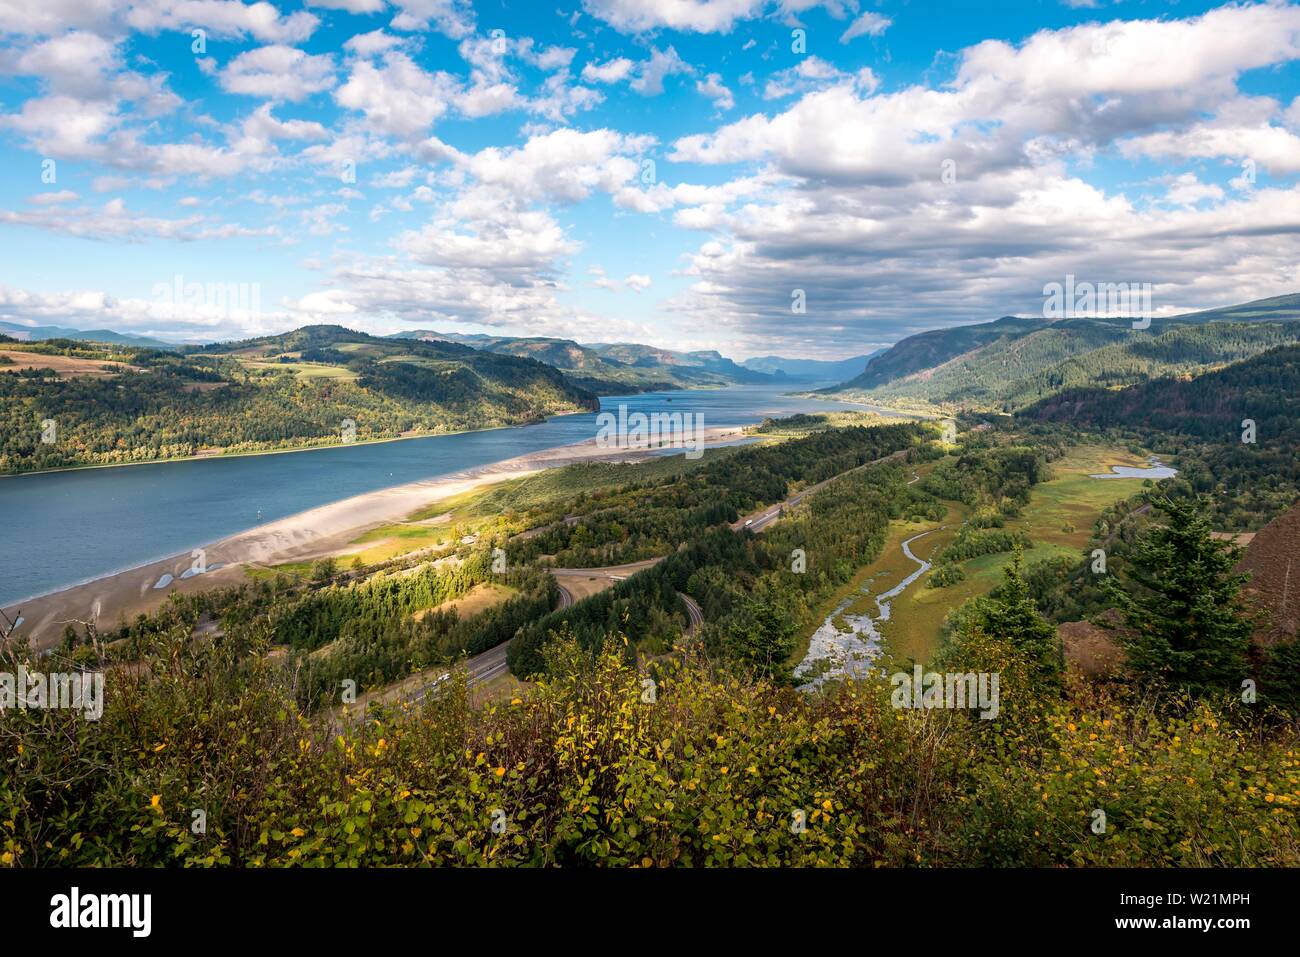 View of the Columbia River from Vista House, near Portland, Oregon, USA Stock Photo